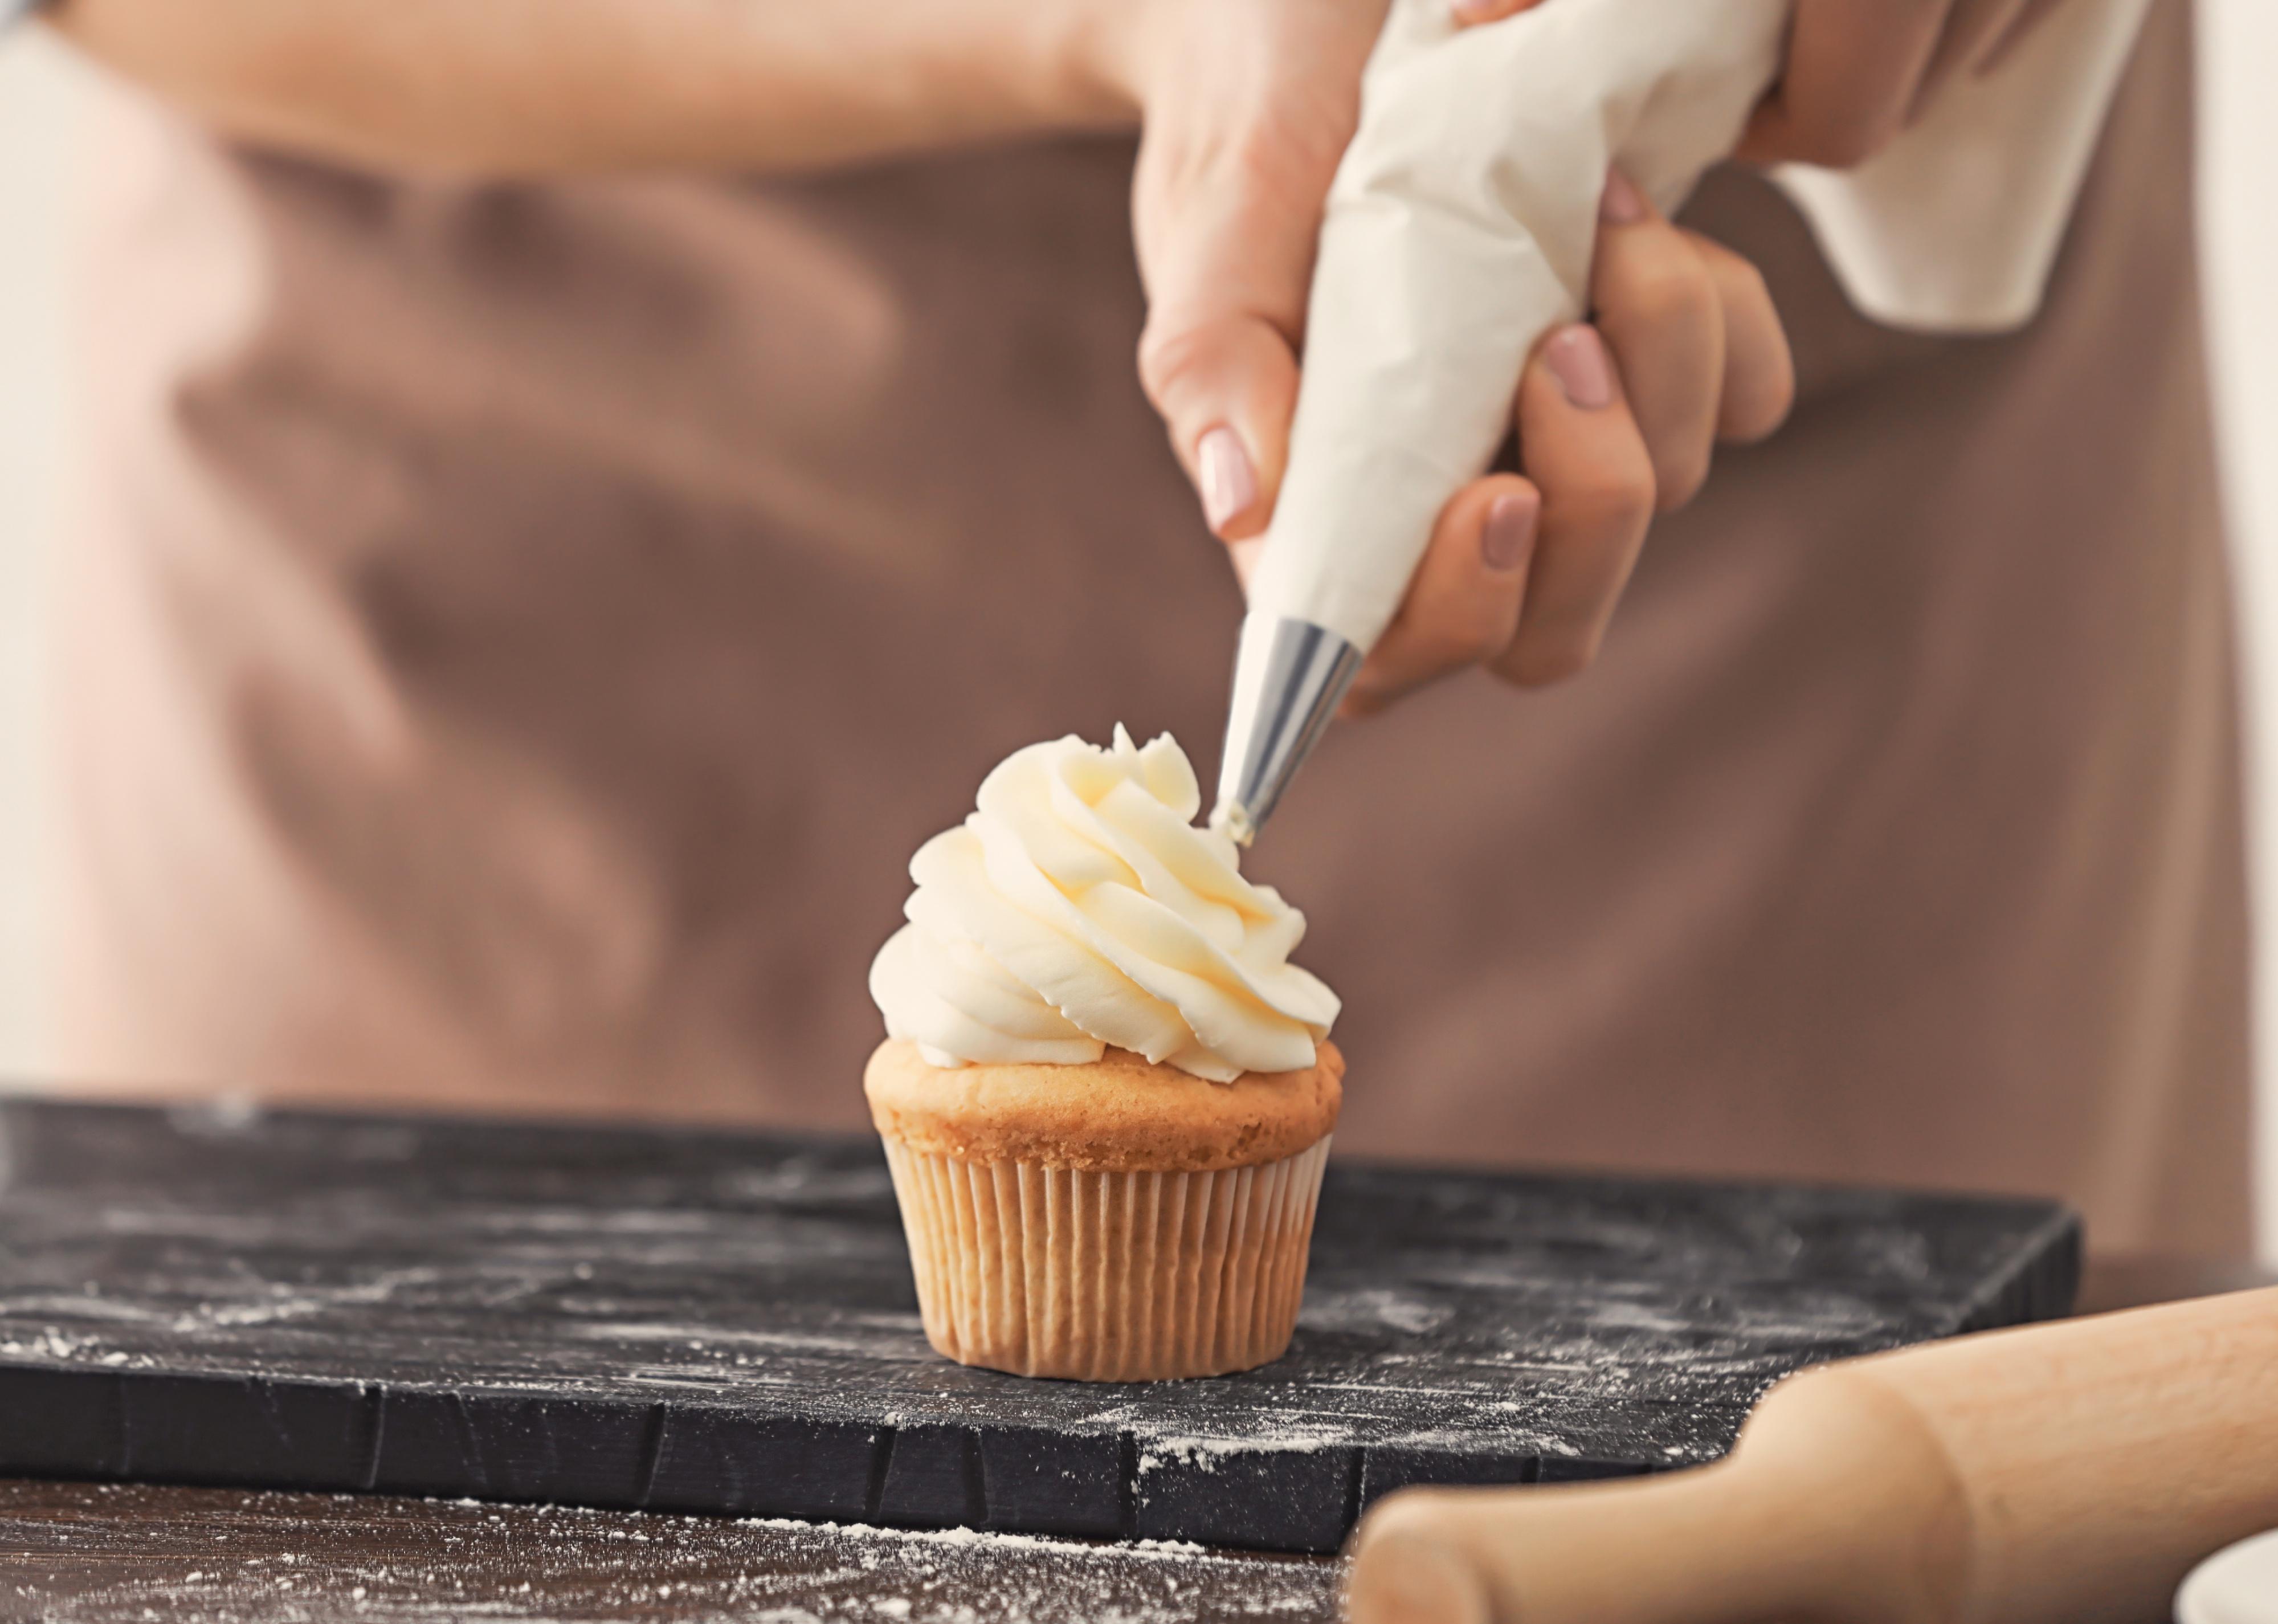 Woman decorating cupcake with frosting at table.